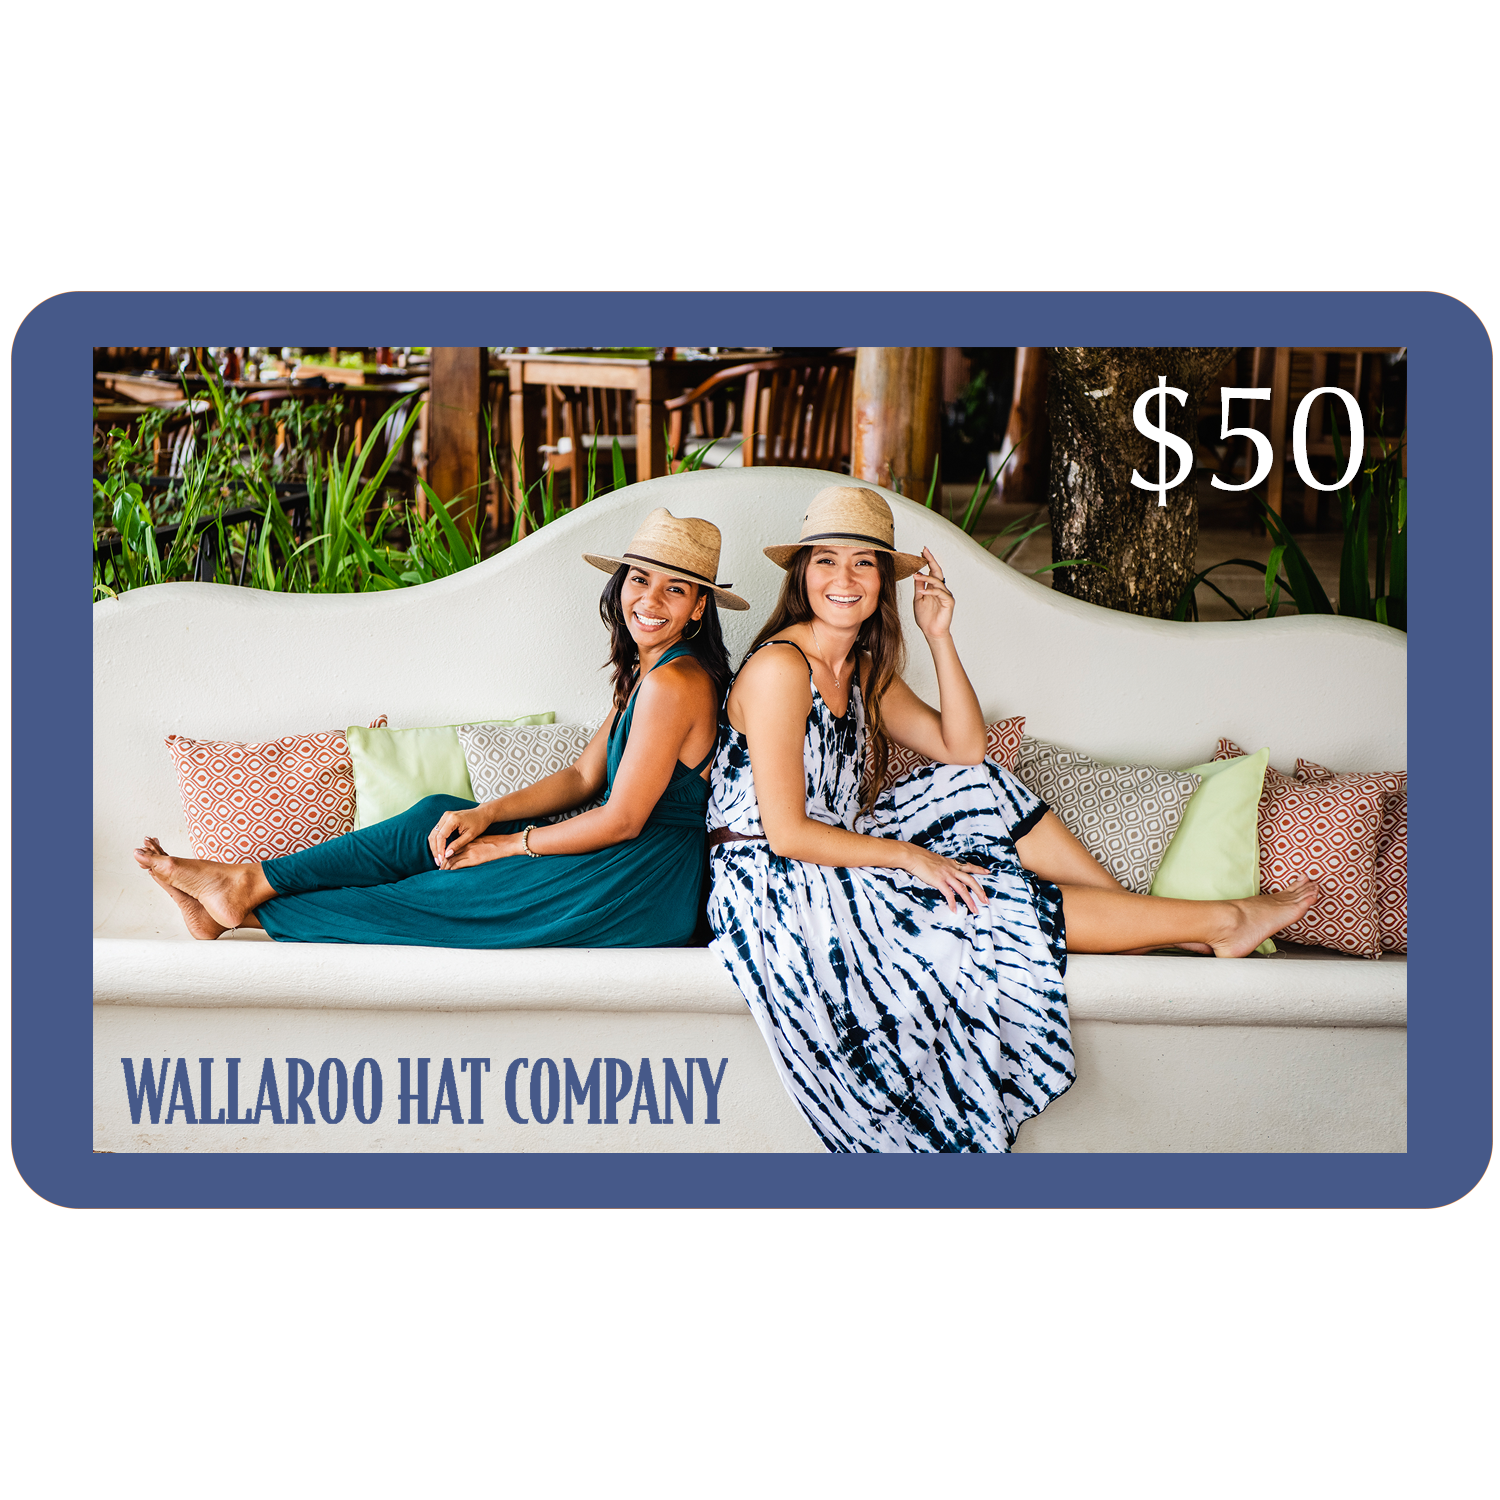 Featuring Women outside wearing chique sun hats with an artisan flair by Wallaroo